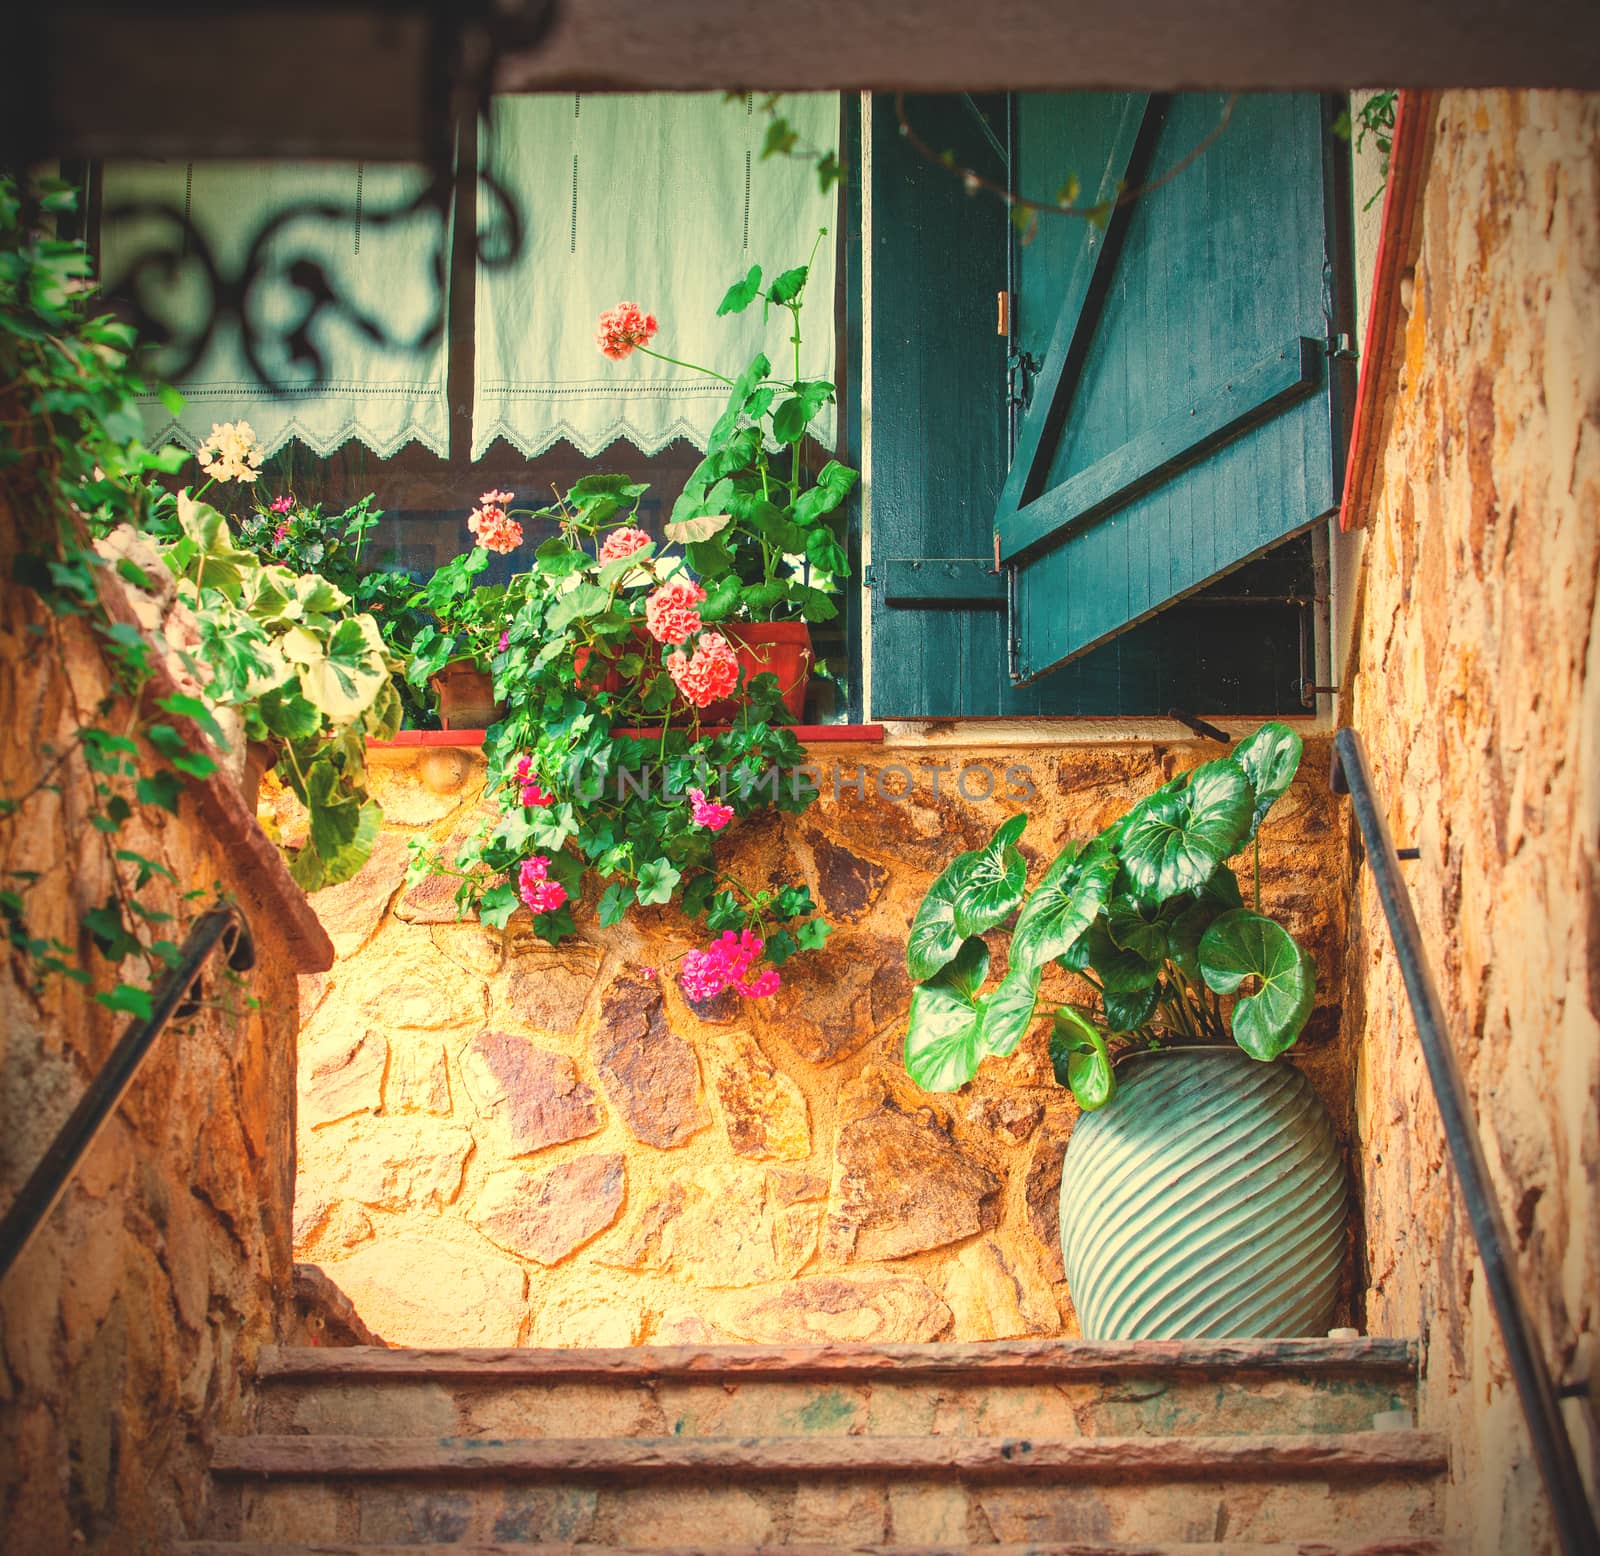 interior patio with flowers on the Mediterranean coast. instagram image style